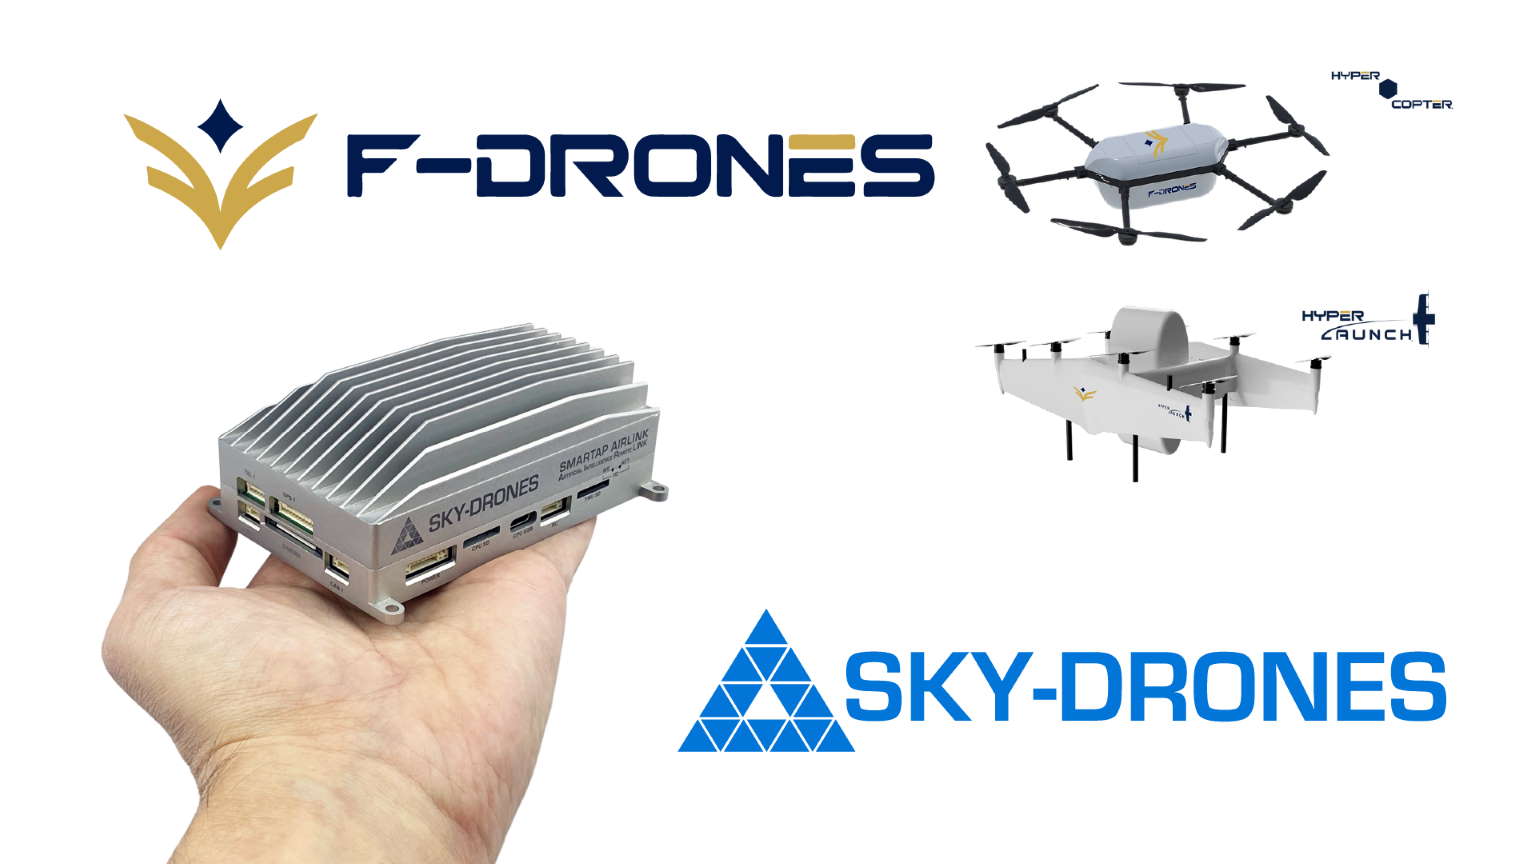 Sky-Drones and F-Drones are powering maritime supply operations worldwide – sUAS Information